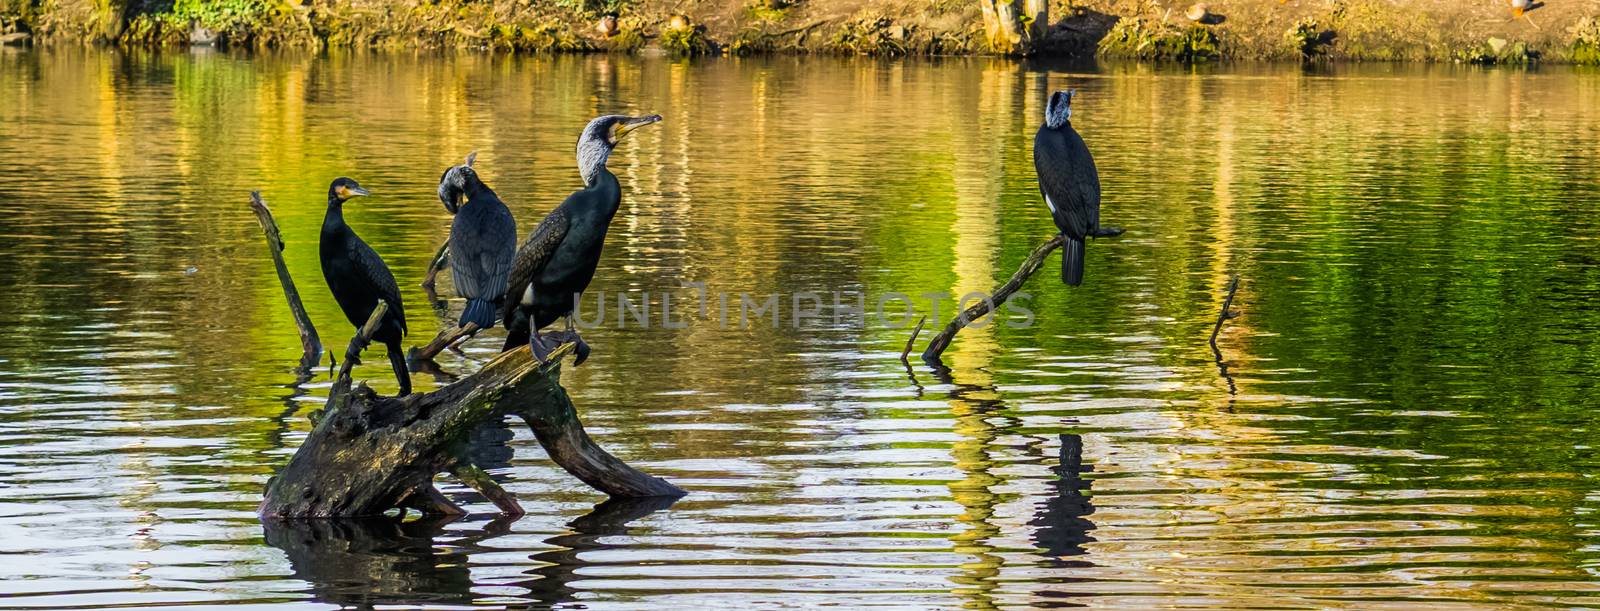 group of diverse cormorants sitting on branches above the water, well spread water birds